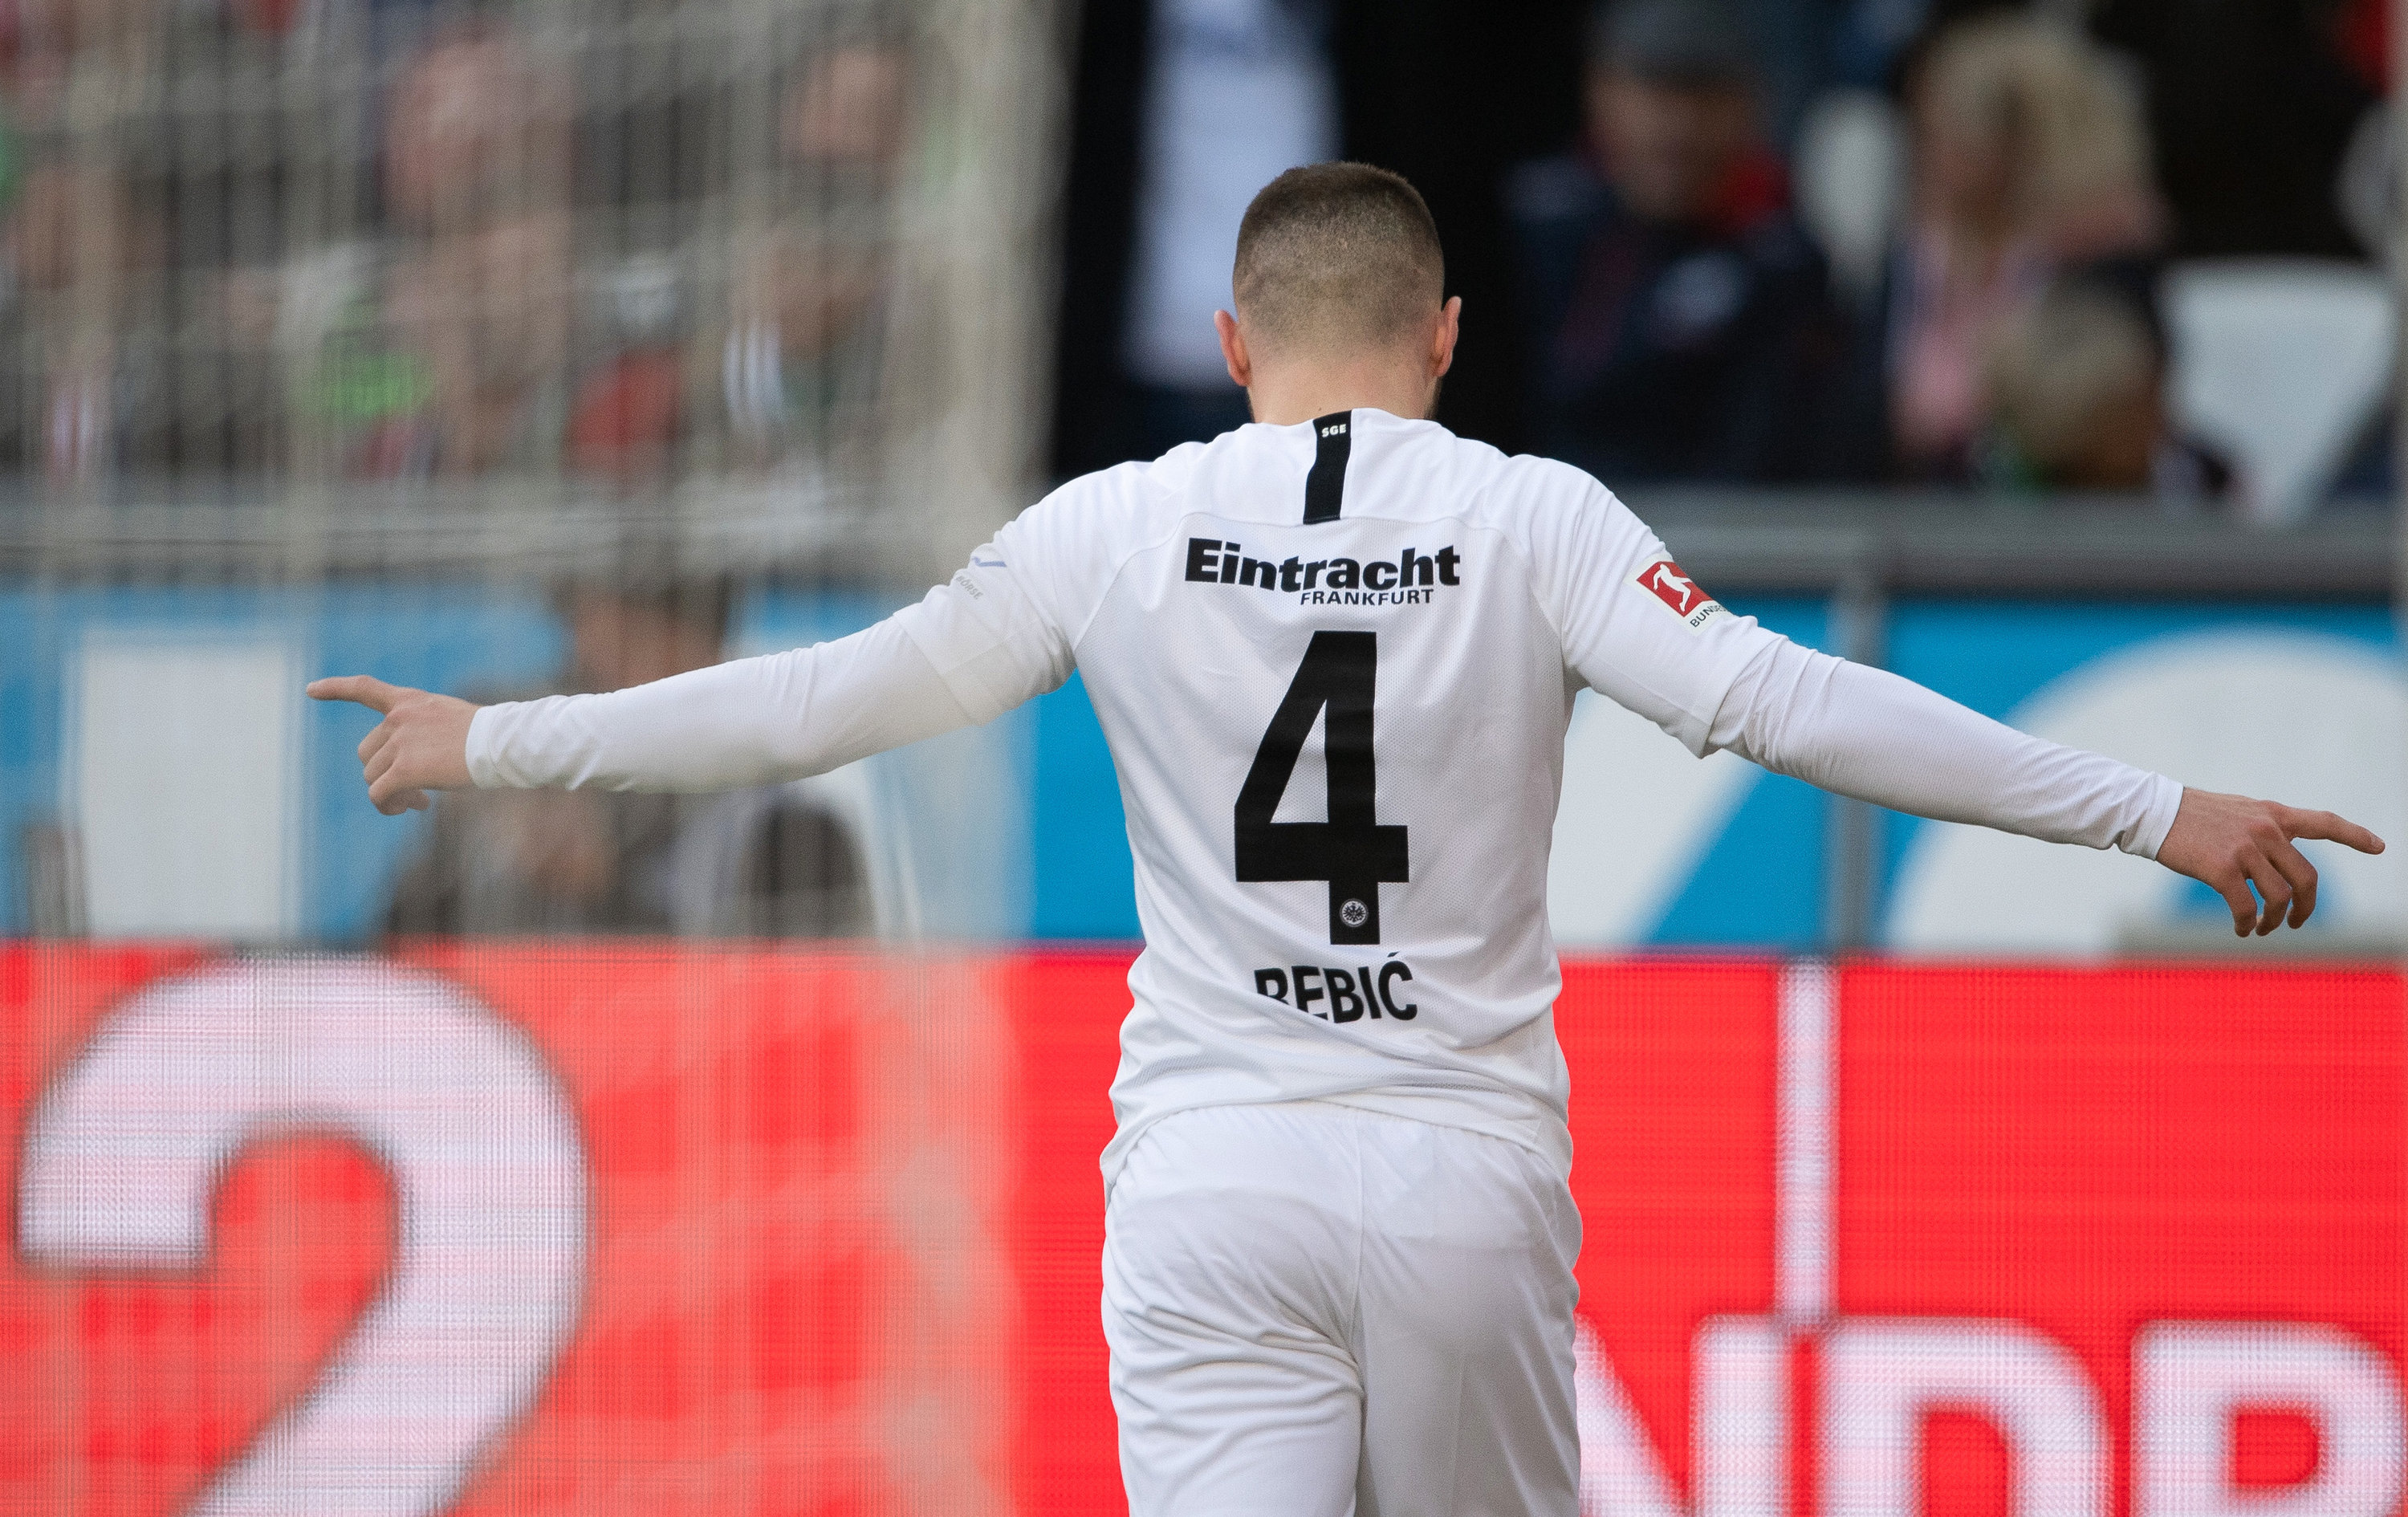 24 February 2019, Hanover: Frankfurt's Ante Rebic celebrates scoring his sides first goal during the German Bundesliga soccer match between Hanover 96 and Eintracht Frankfurt at HDI-Arena. Photo: Swen Pförtner/dpa - IMPORTANT NOTE: In accordance with the requirements of the DFL Deutsche Fußball Liga or the DFB Deutscher Fußball-Bund, it is prohibited to use or have used photographs taken in the stadium and/or the match in the form of sequence images and/or video-like photo sequences.